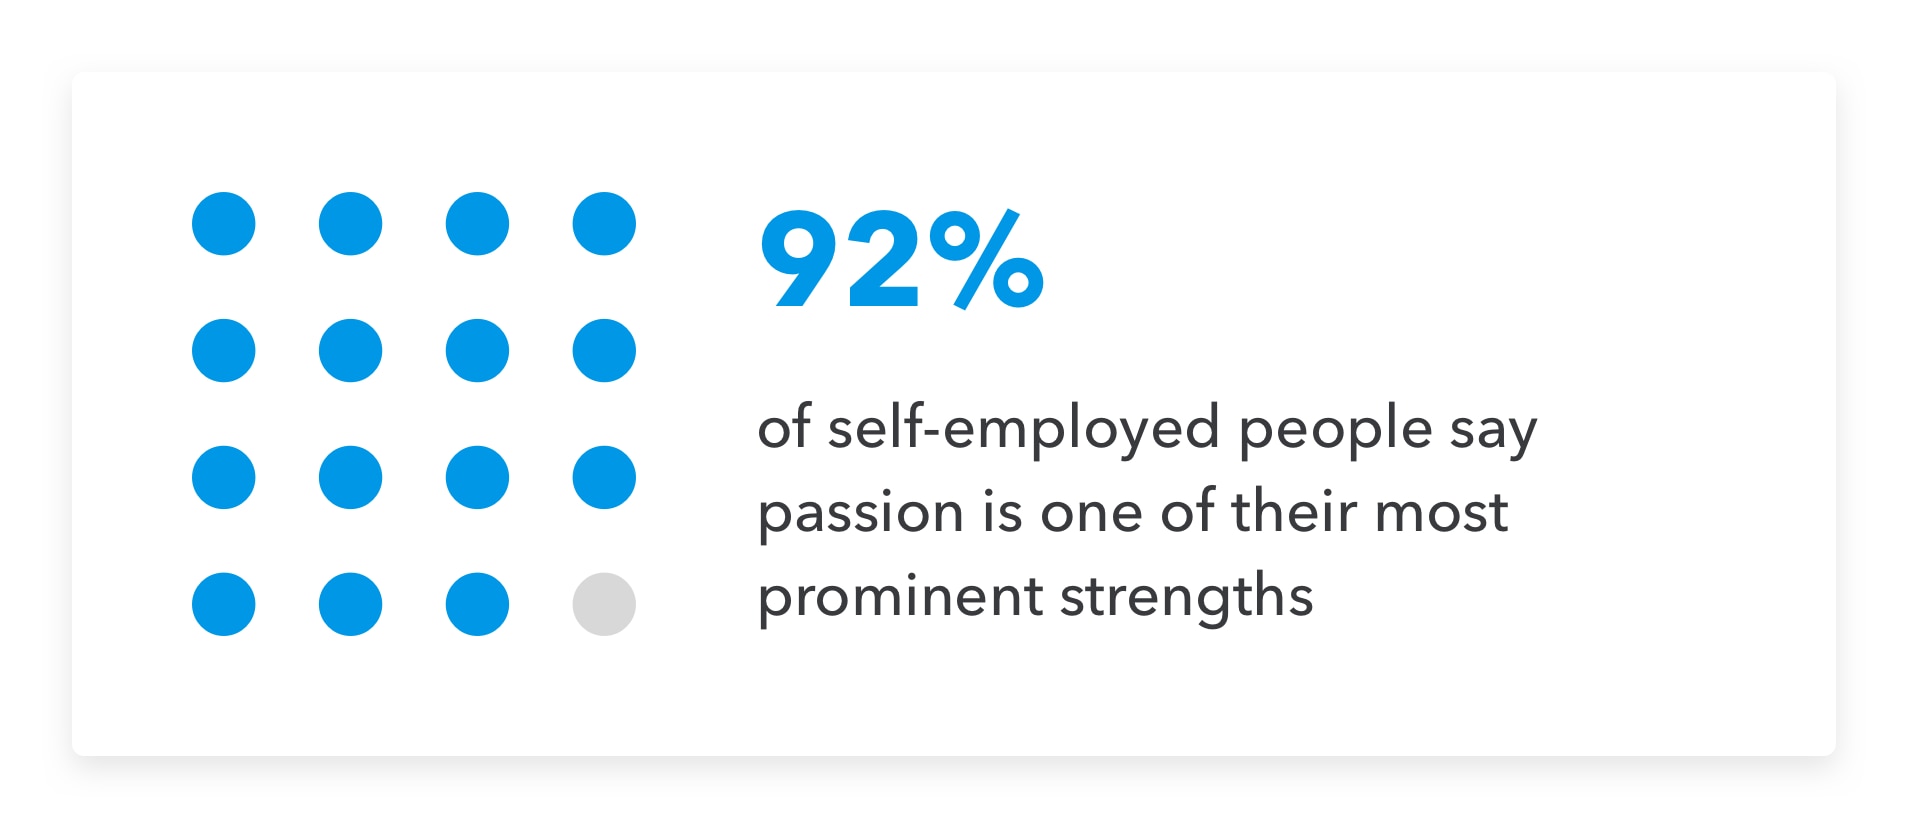 92% of self-employed people say passion is one of their most prominent strengths